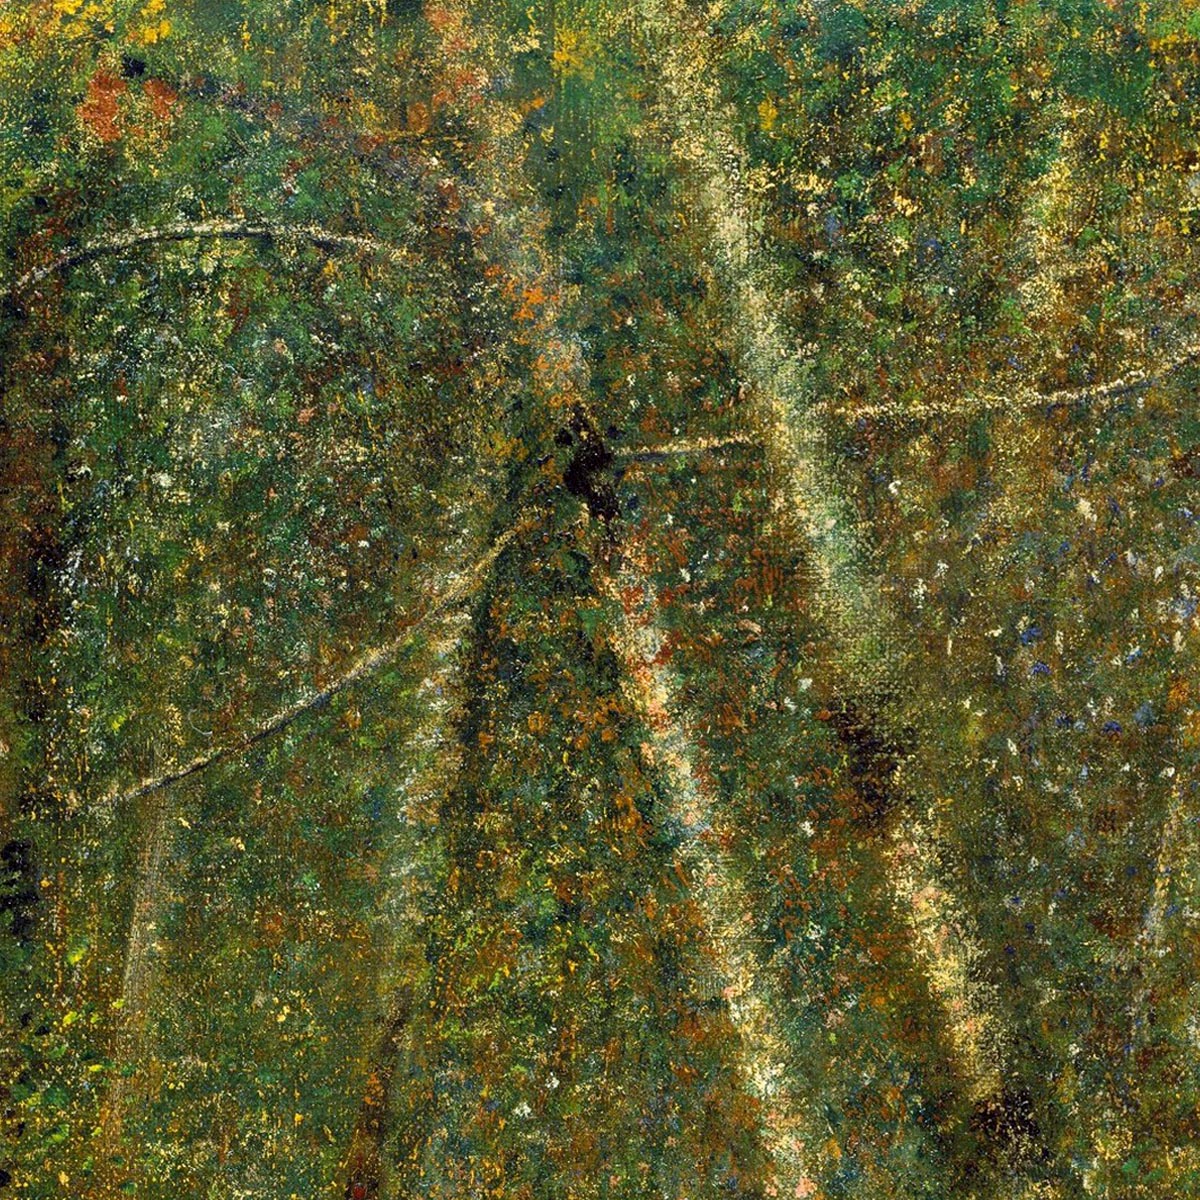 The Forest at Pontaubert Art Print by Georges Seurat